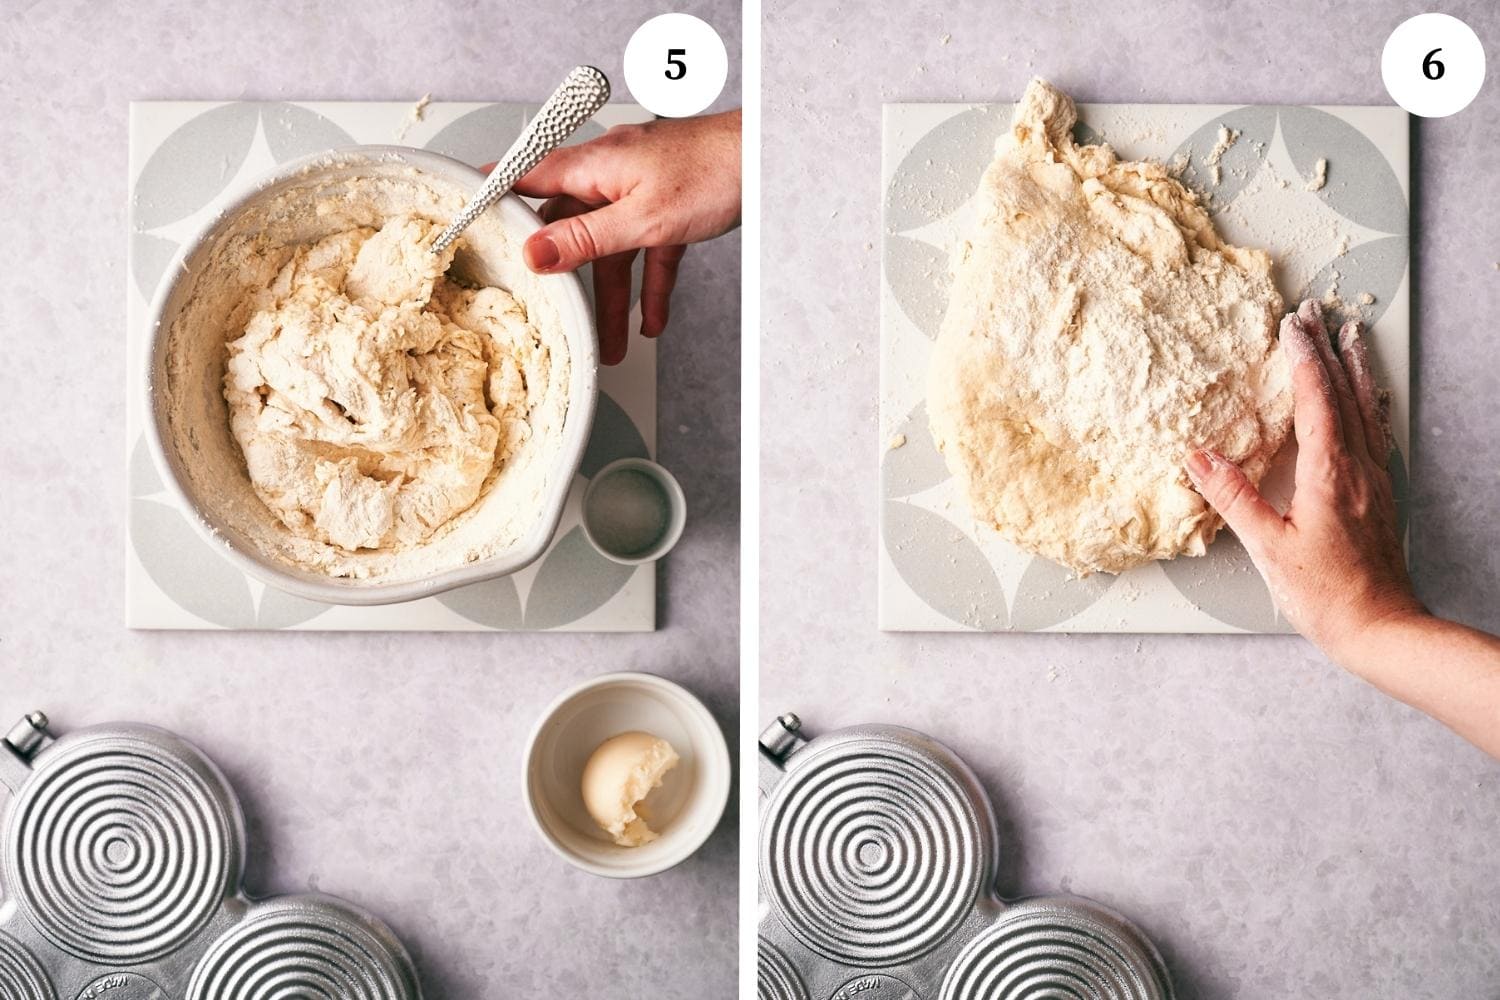 Process of making Tigelle Foccaccine Bread: Add the room temperature soft lard or shortening and salt and mix together.